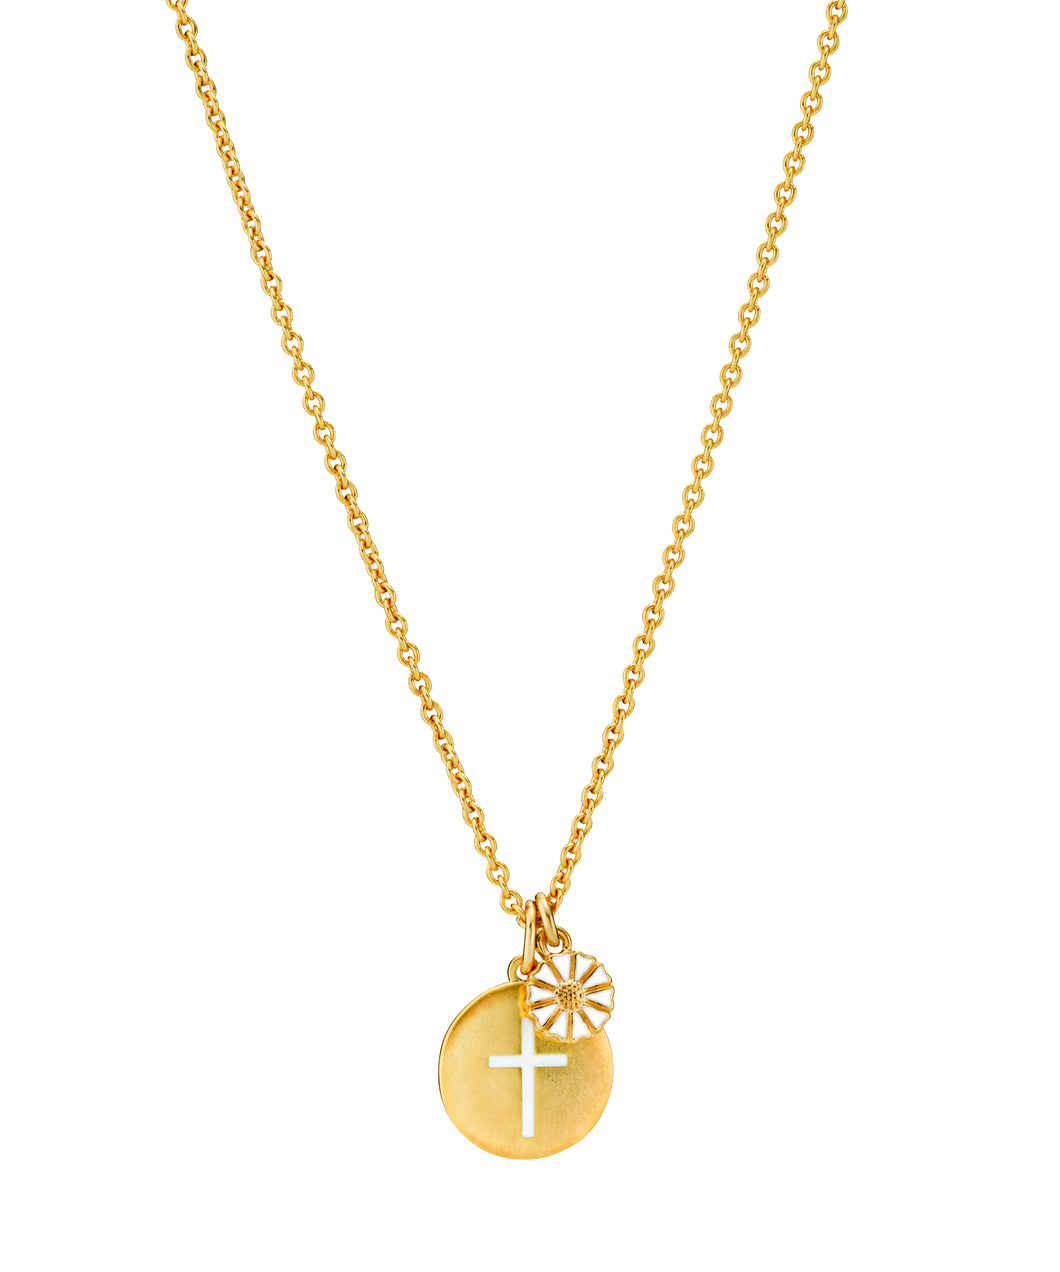 Daisy necklace 7.5mm with cross in coin on anchor chain 45-48cm (925)